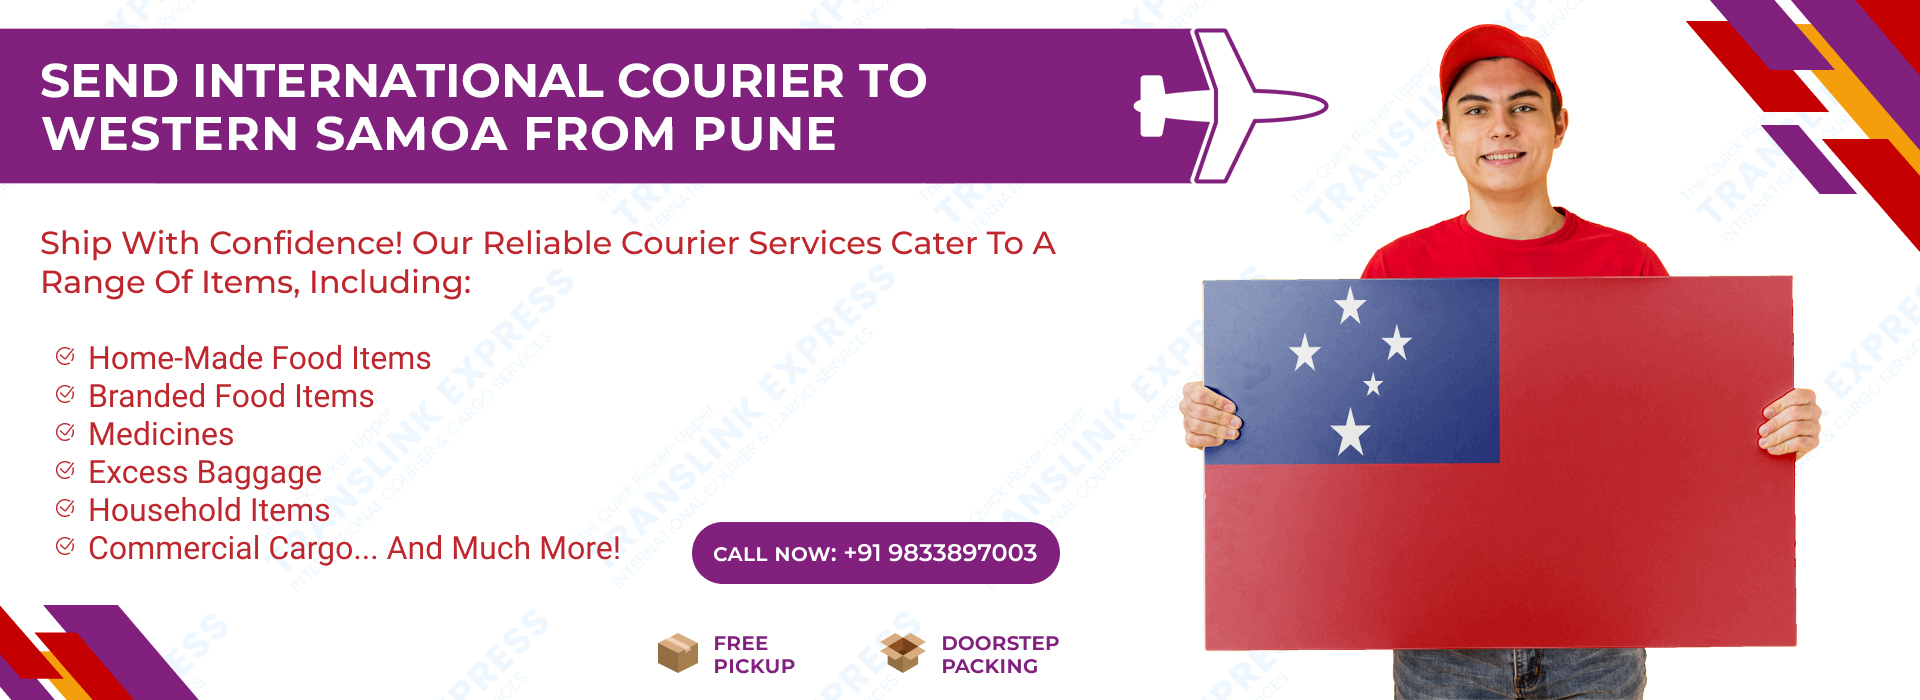 Courier to Western Samoa From Pune